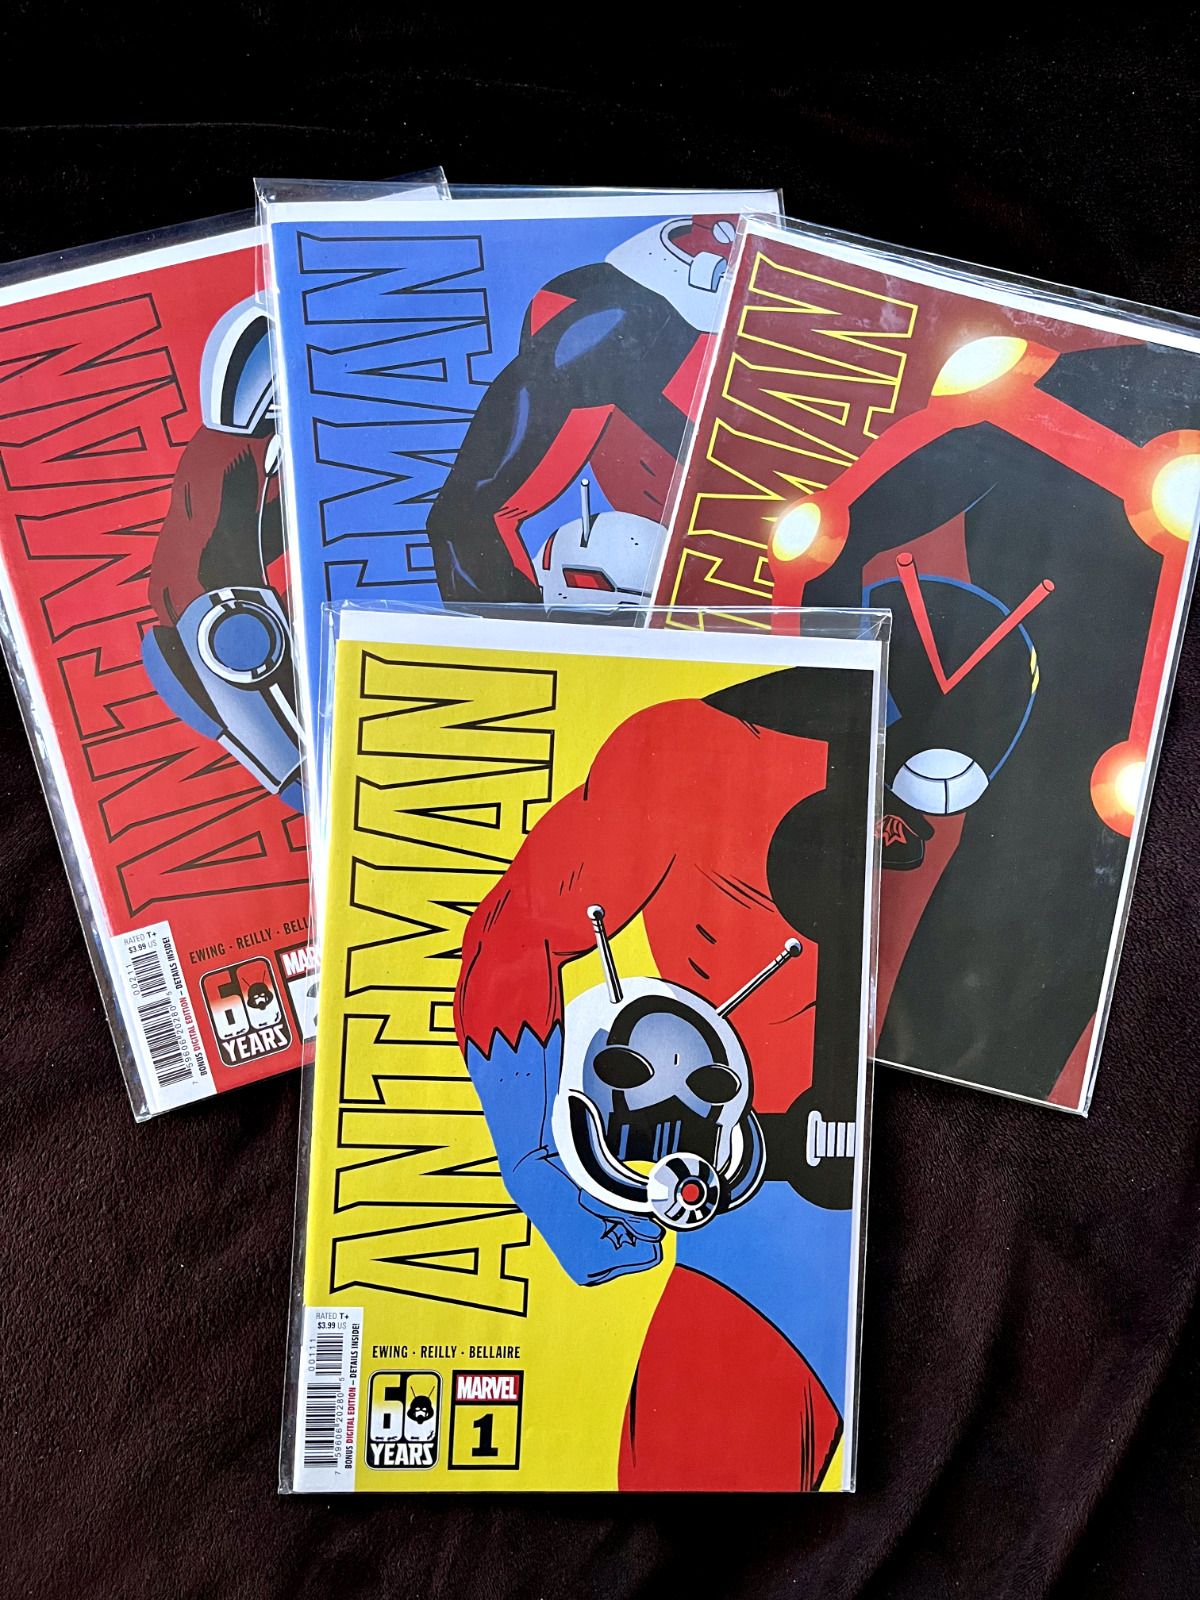 Ant-Man 2022 Compete series #1 - 4 (Marvel Comics) Ewing & Reilly